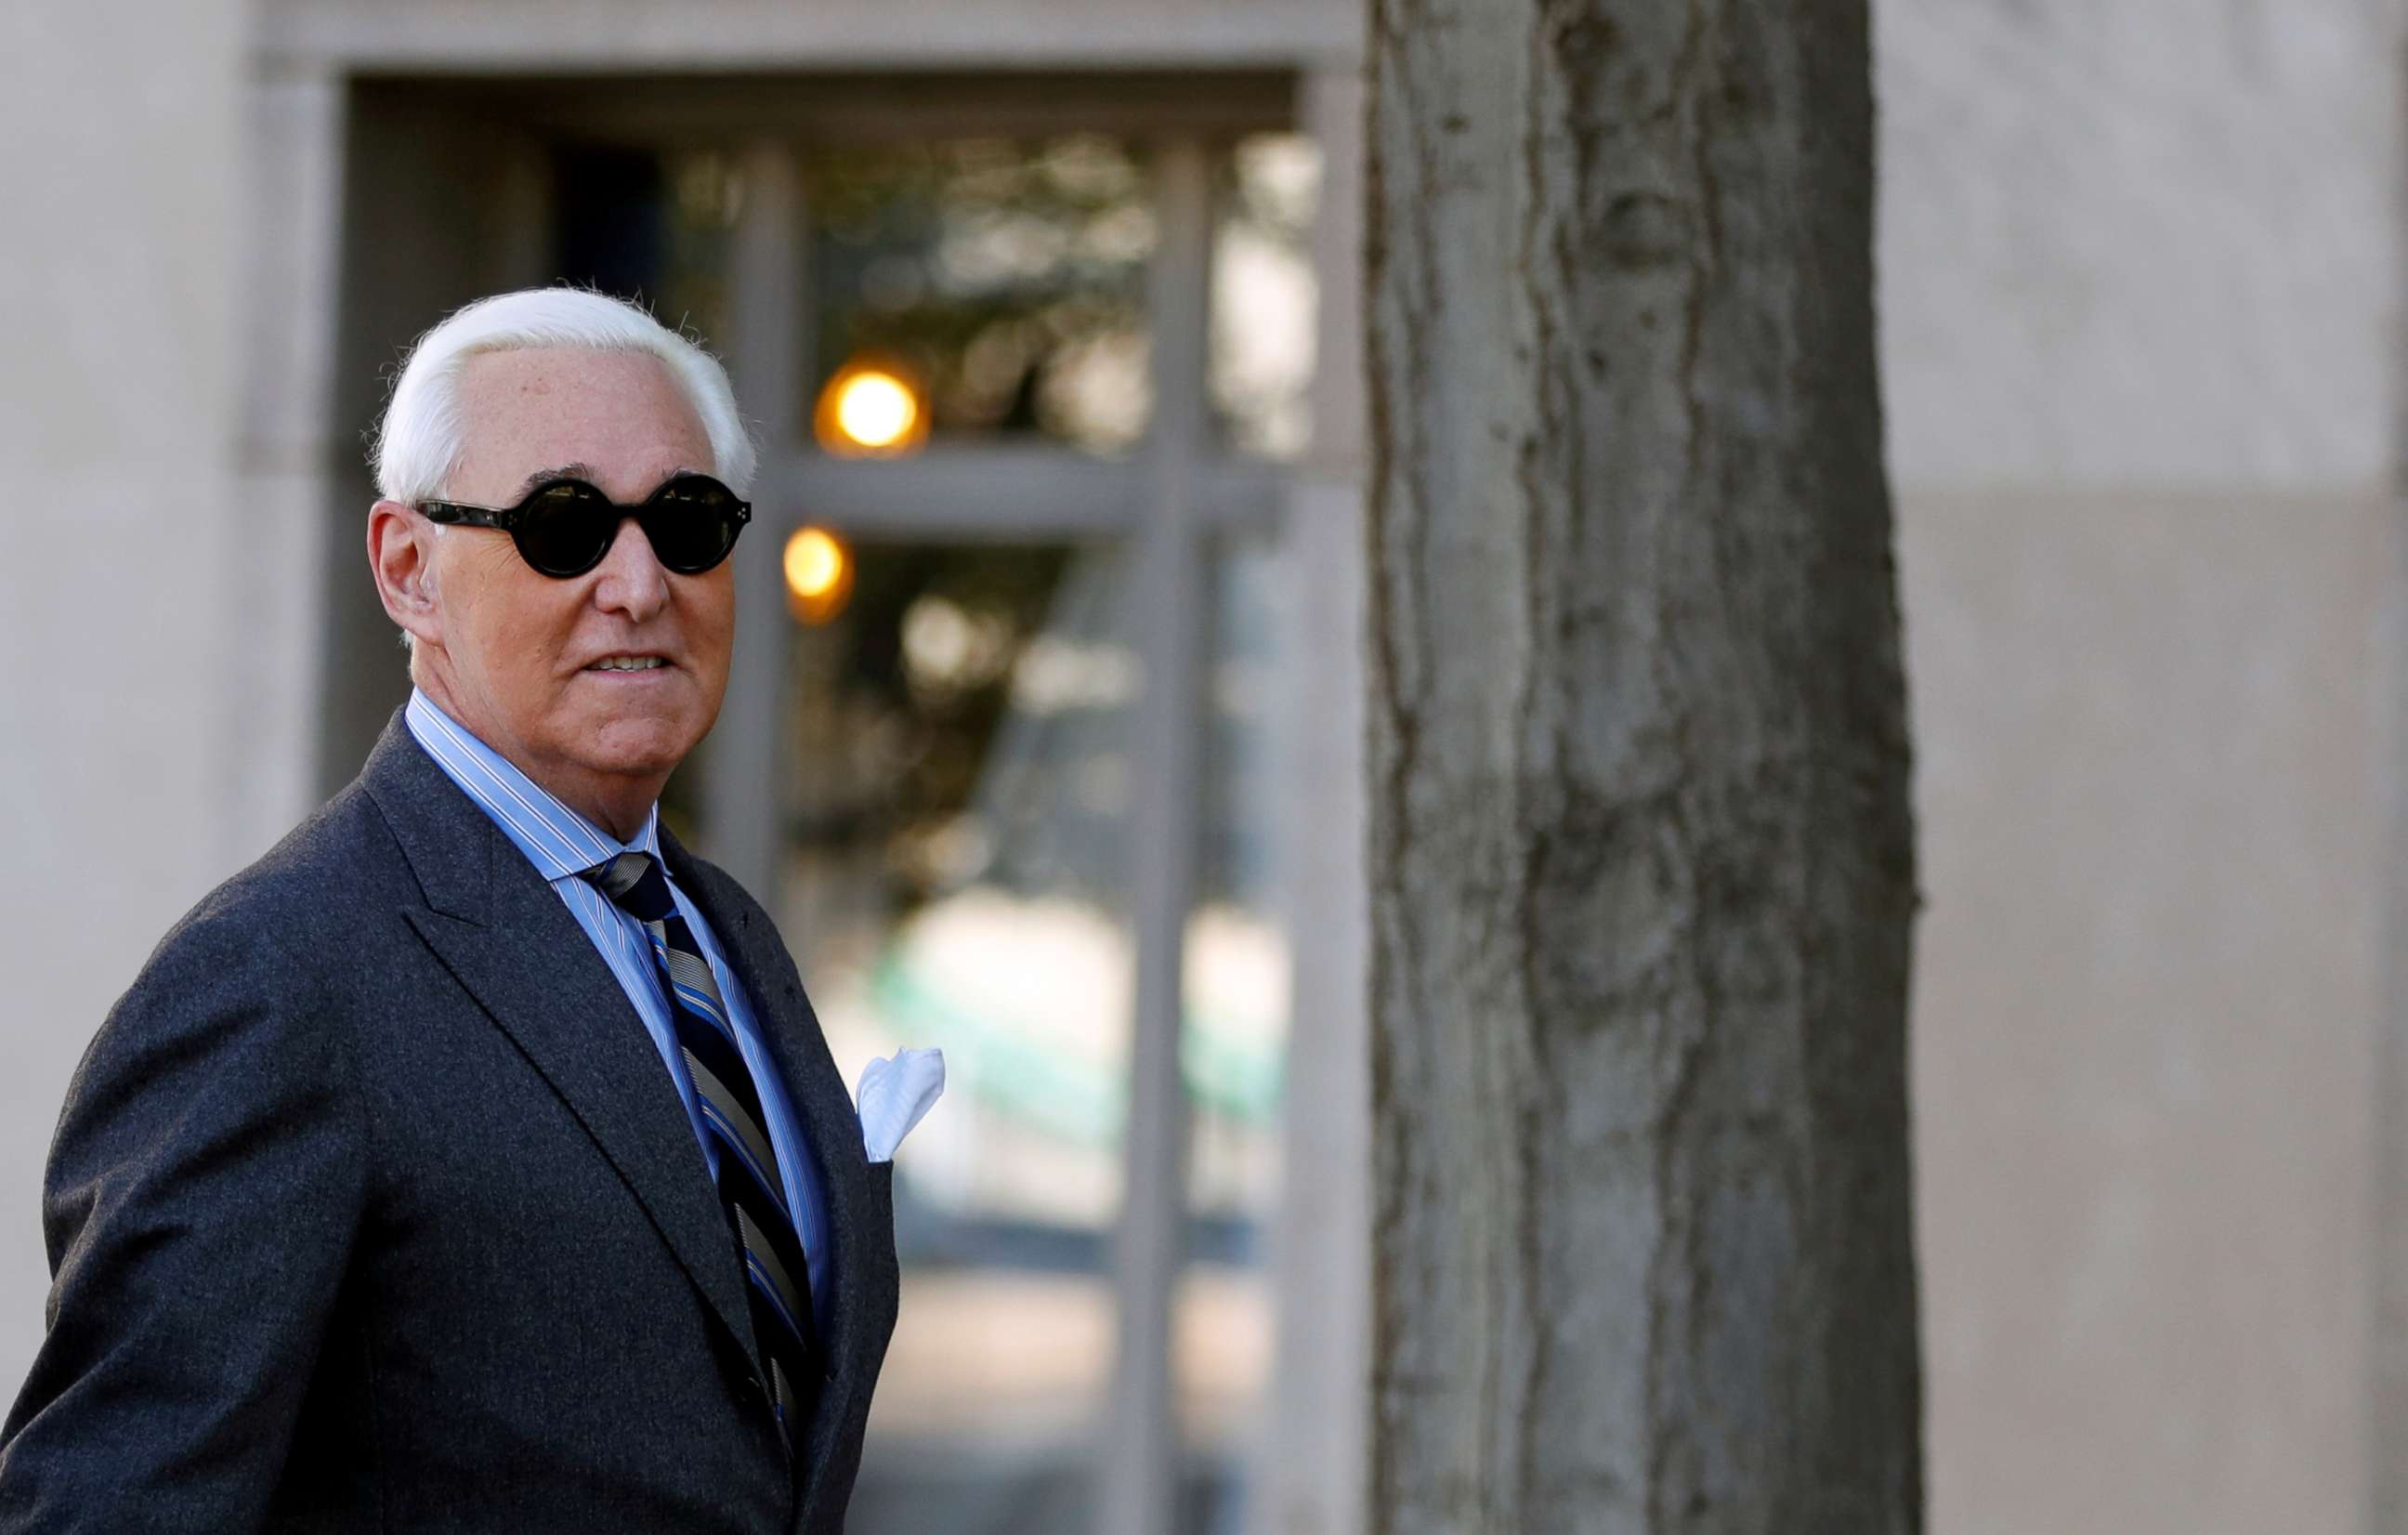 PHOTO: File photo: Roger Stone, former campaign adviser President Donald Trump, arrives for his criminal trial on charges of lying to Congress, obstructing justice and witness tampering at U.S. District Court in Washington, Nov. 13, 2019.